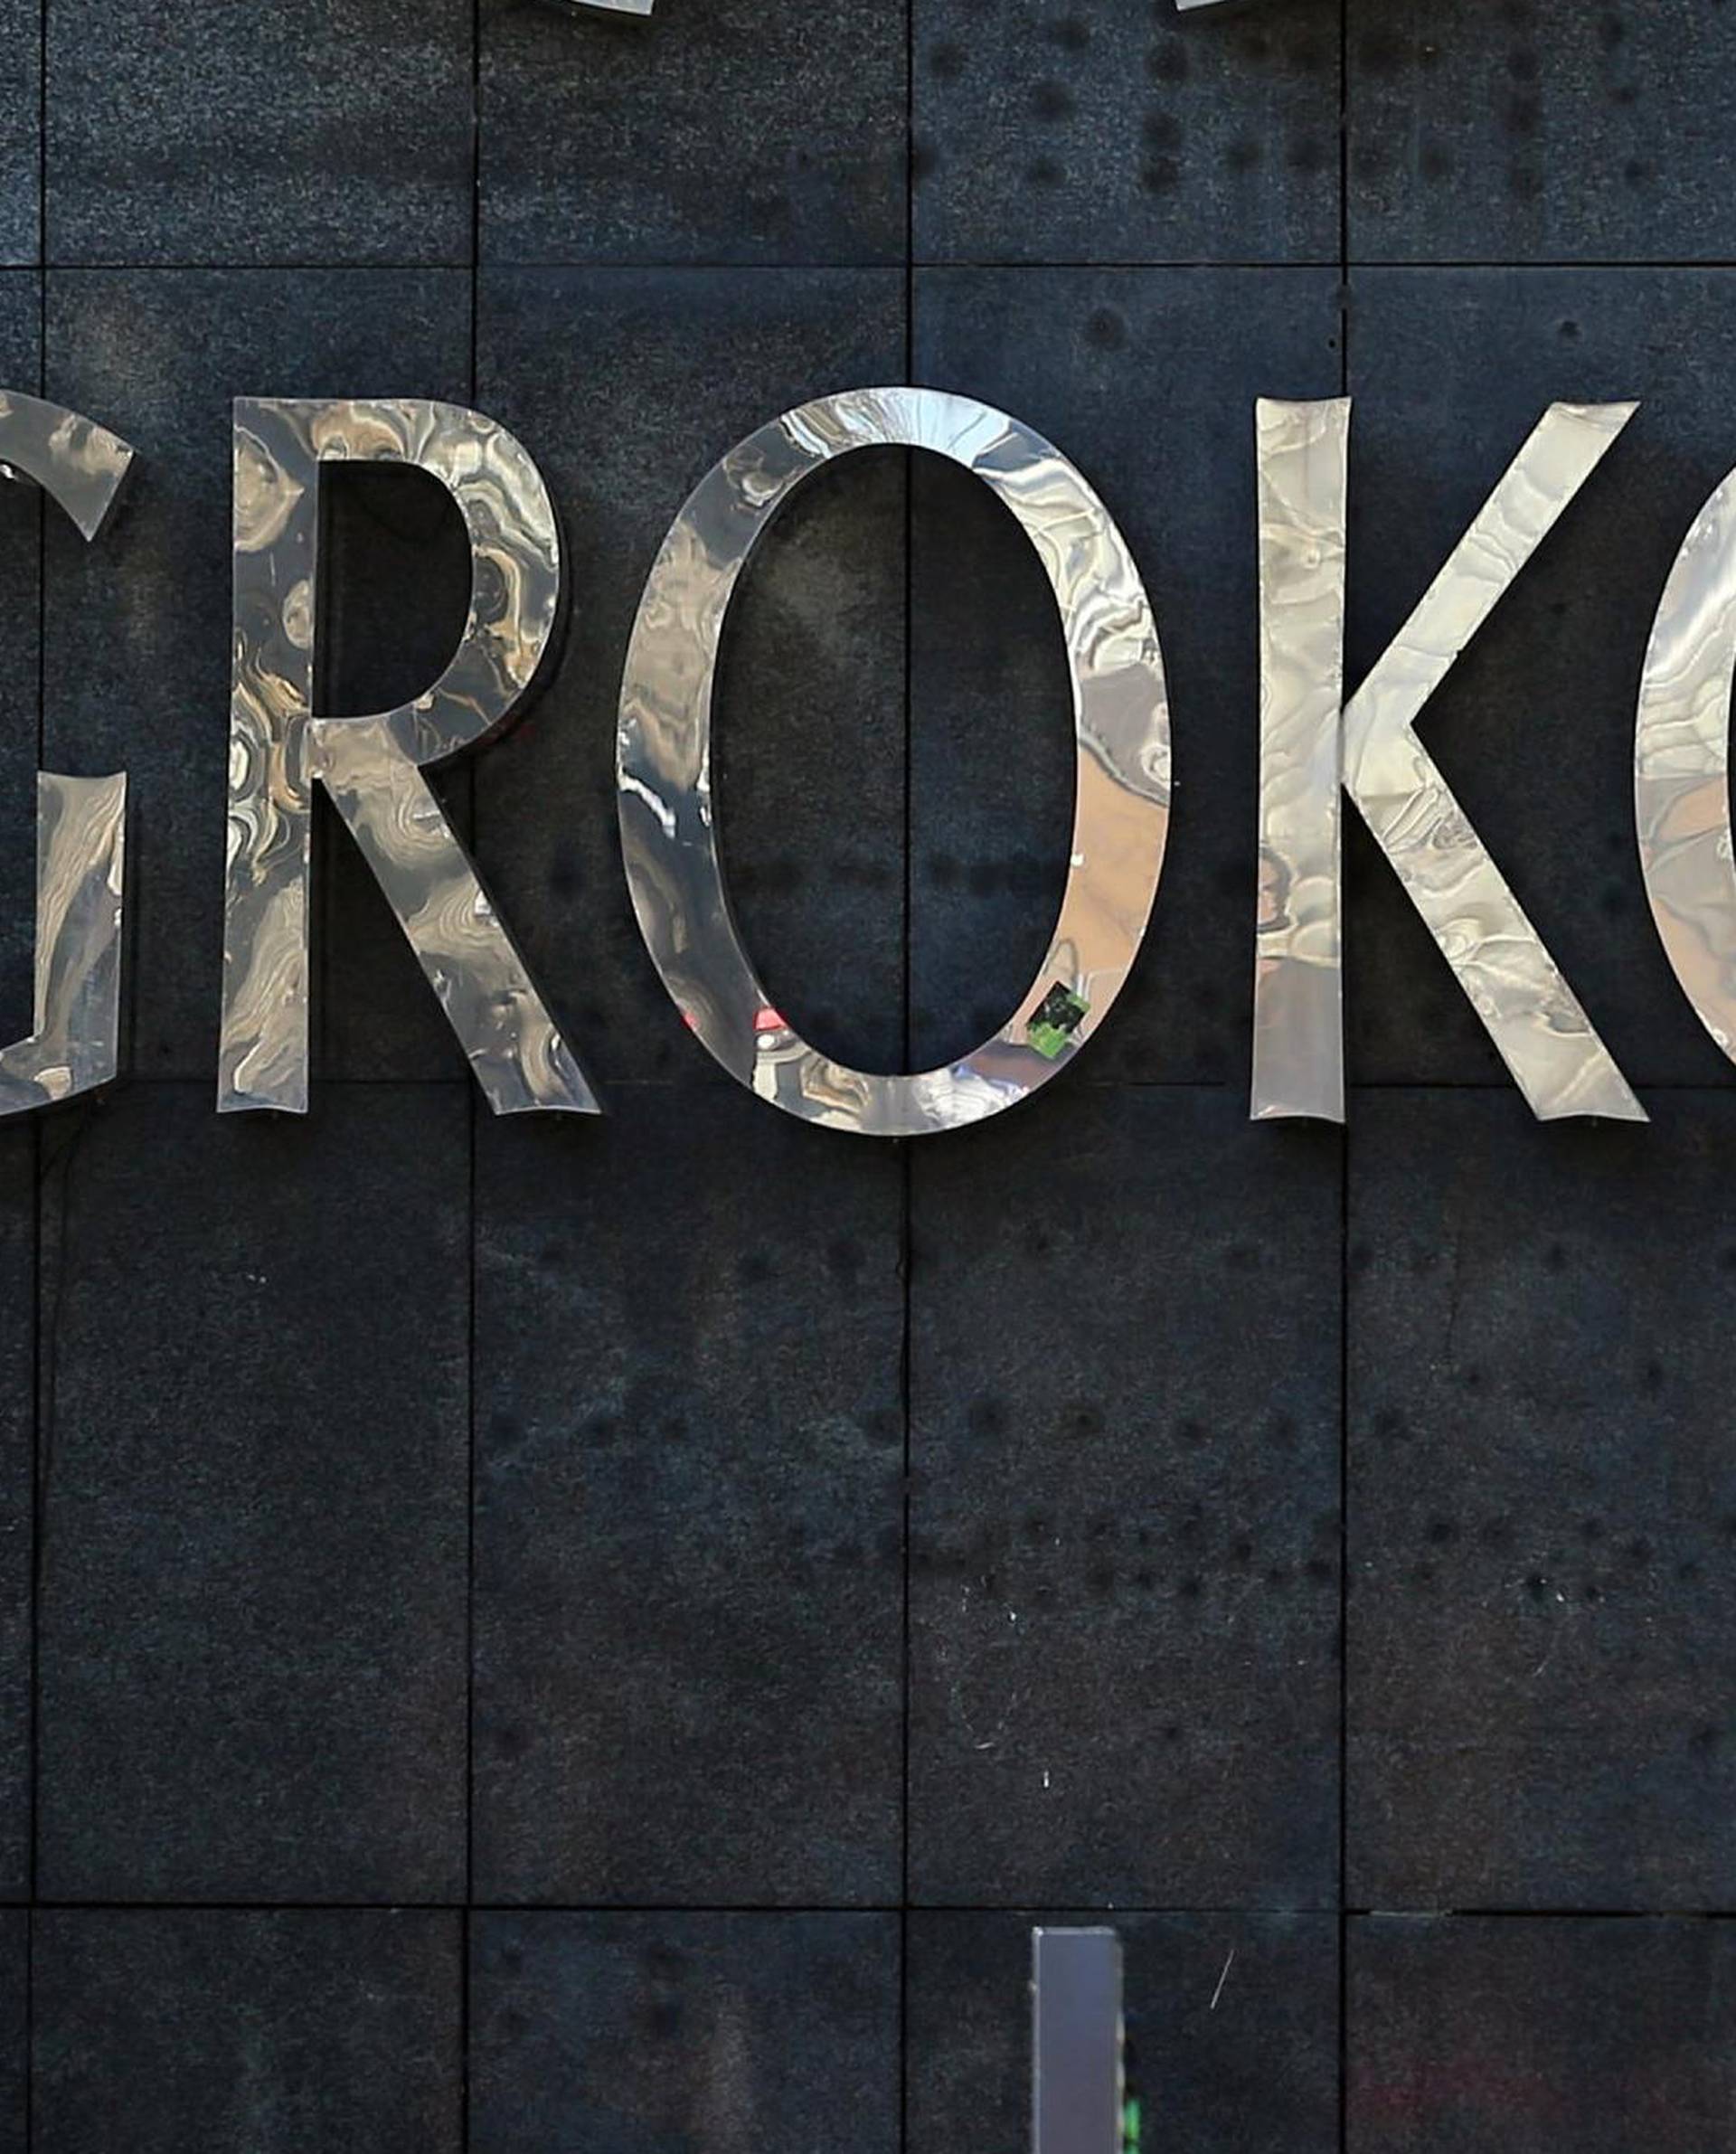 Agrokor logo is seen at the company's headquarters in Zagreb